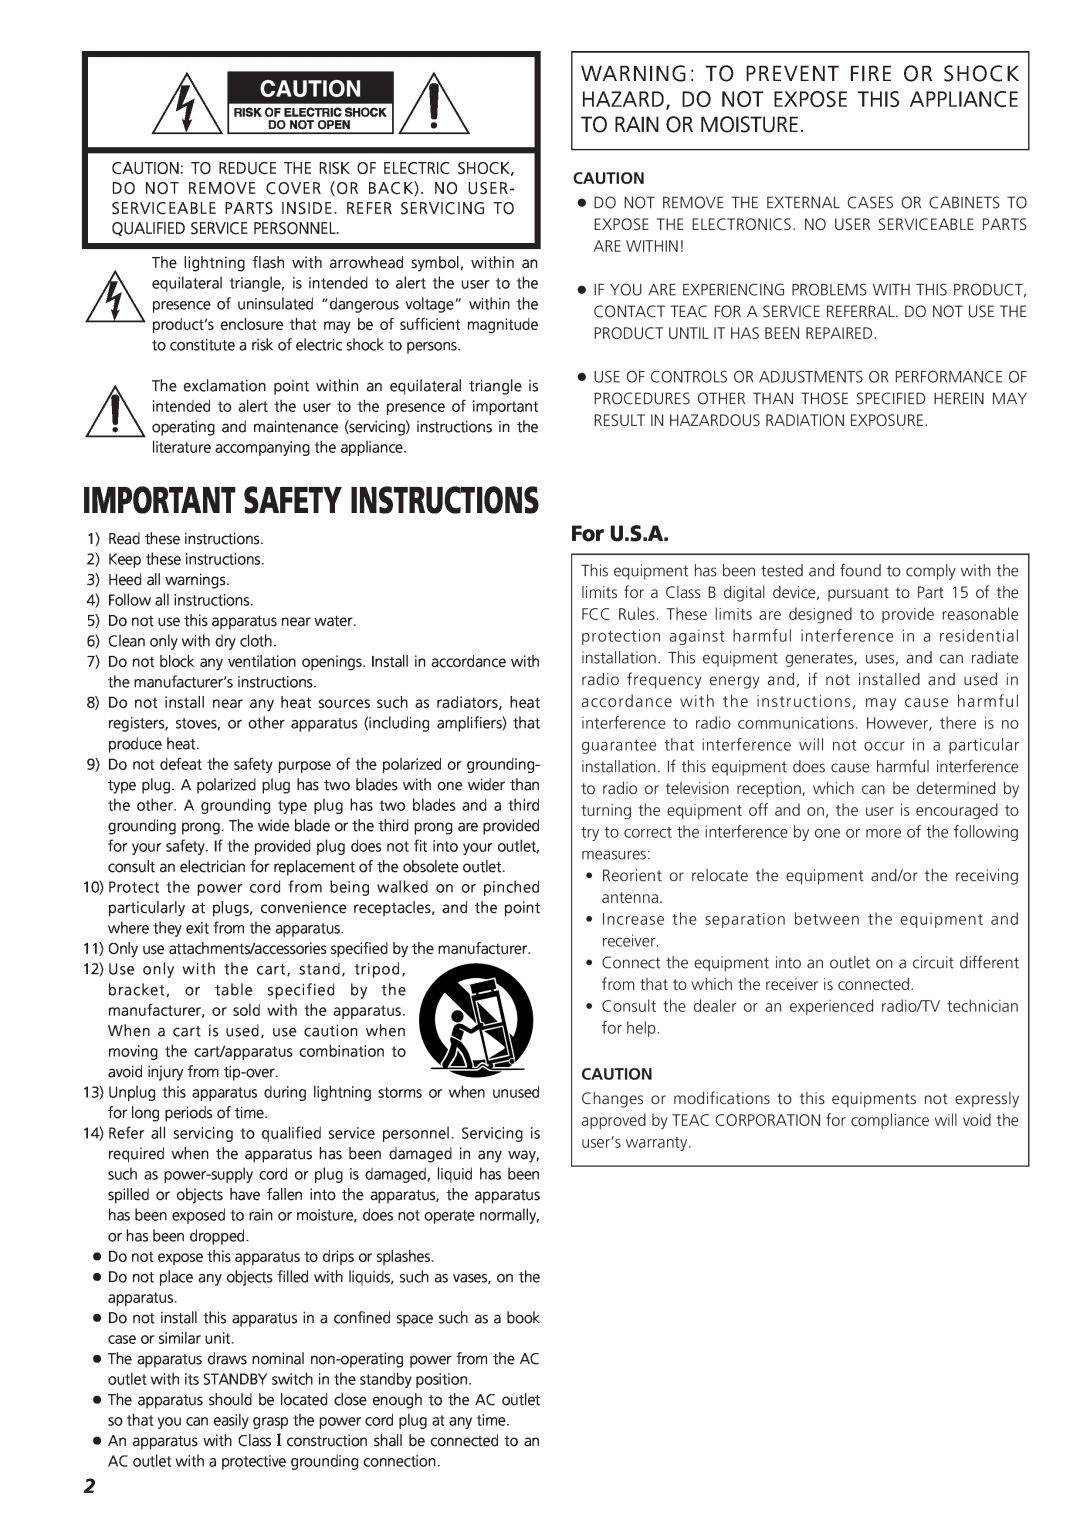 Teac SZ-1 owner manual For U.S.A, Important Safety Instructions 